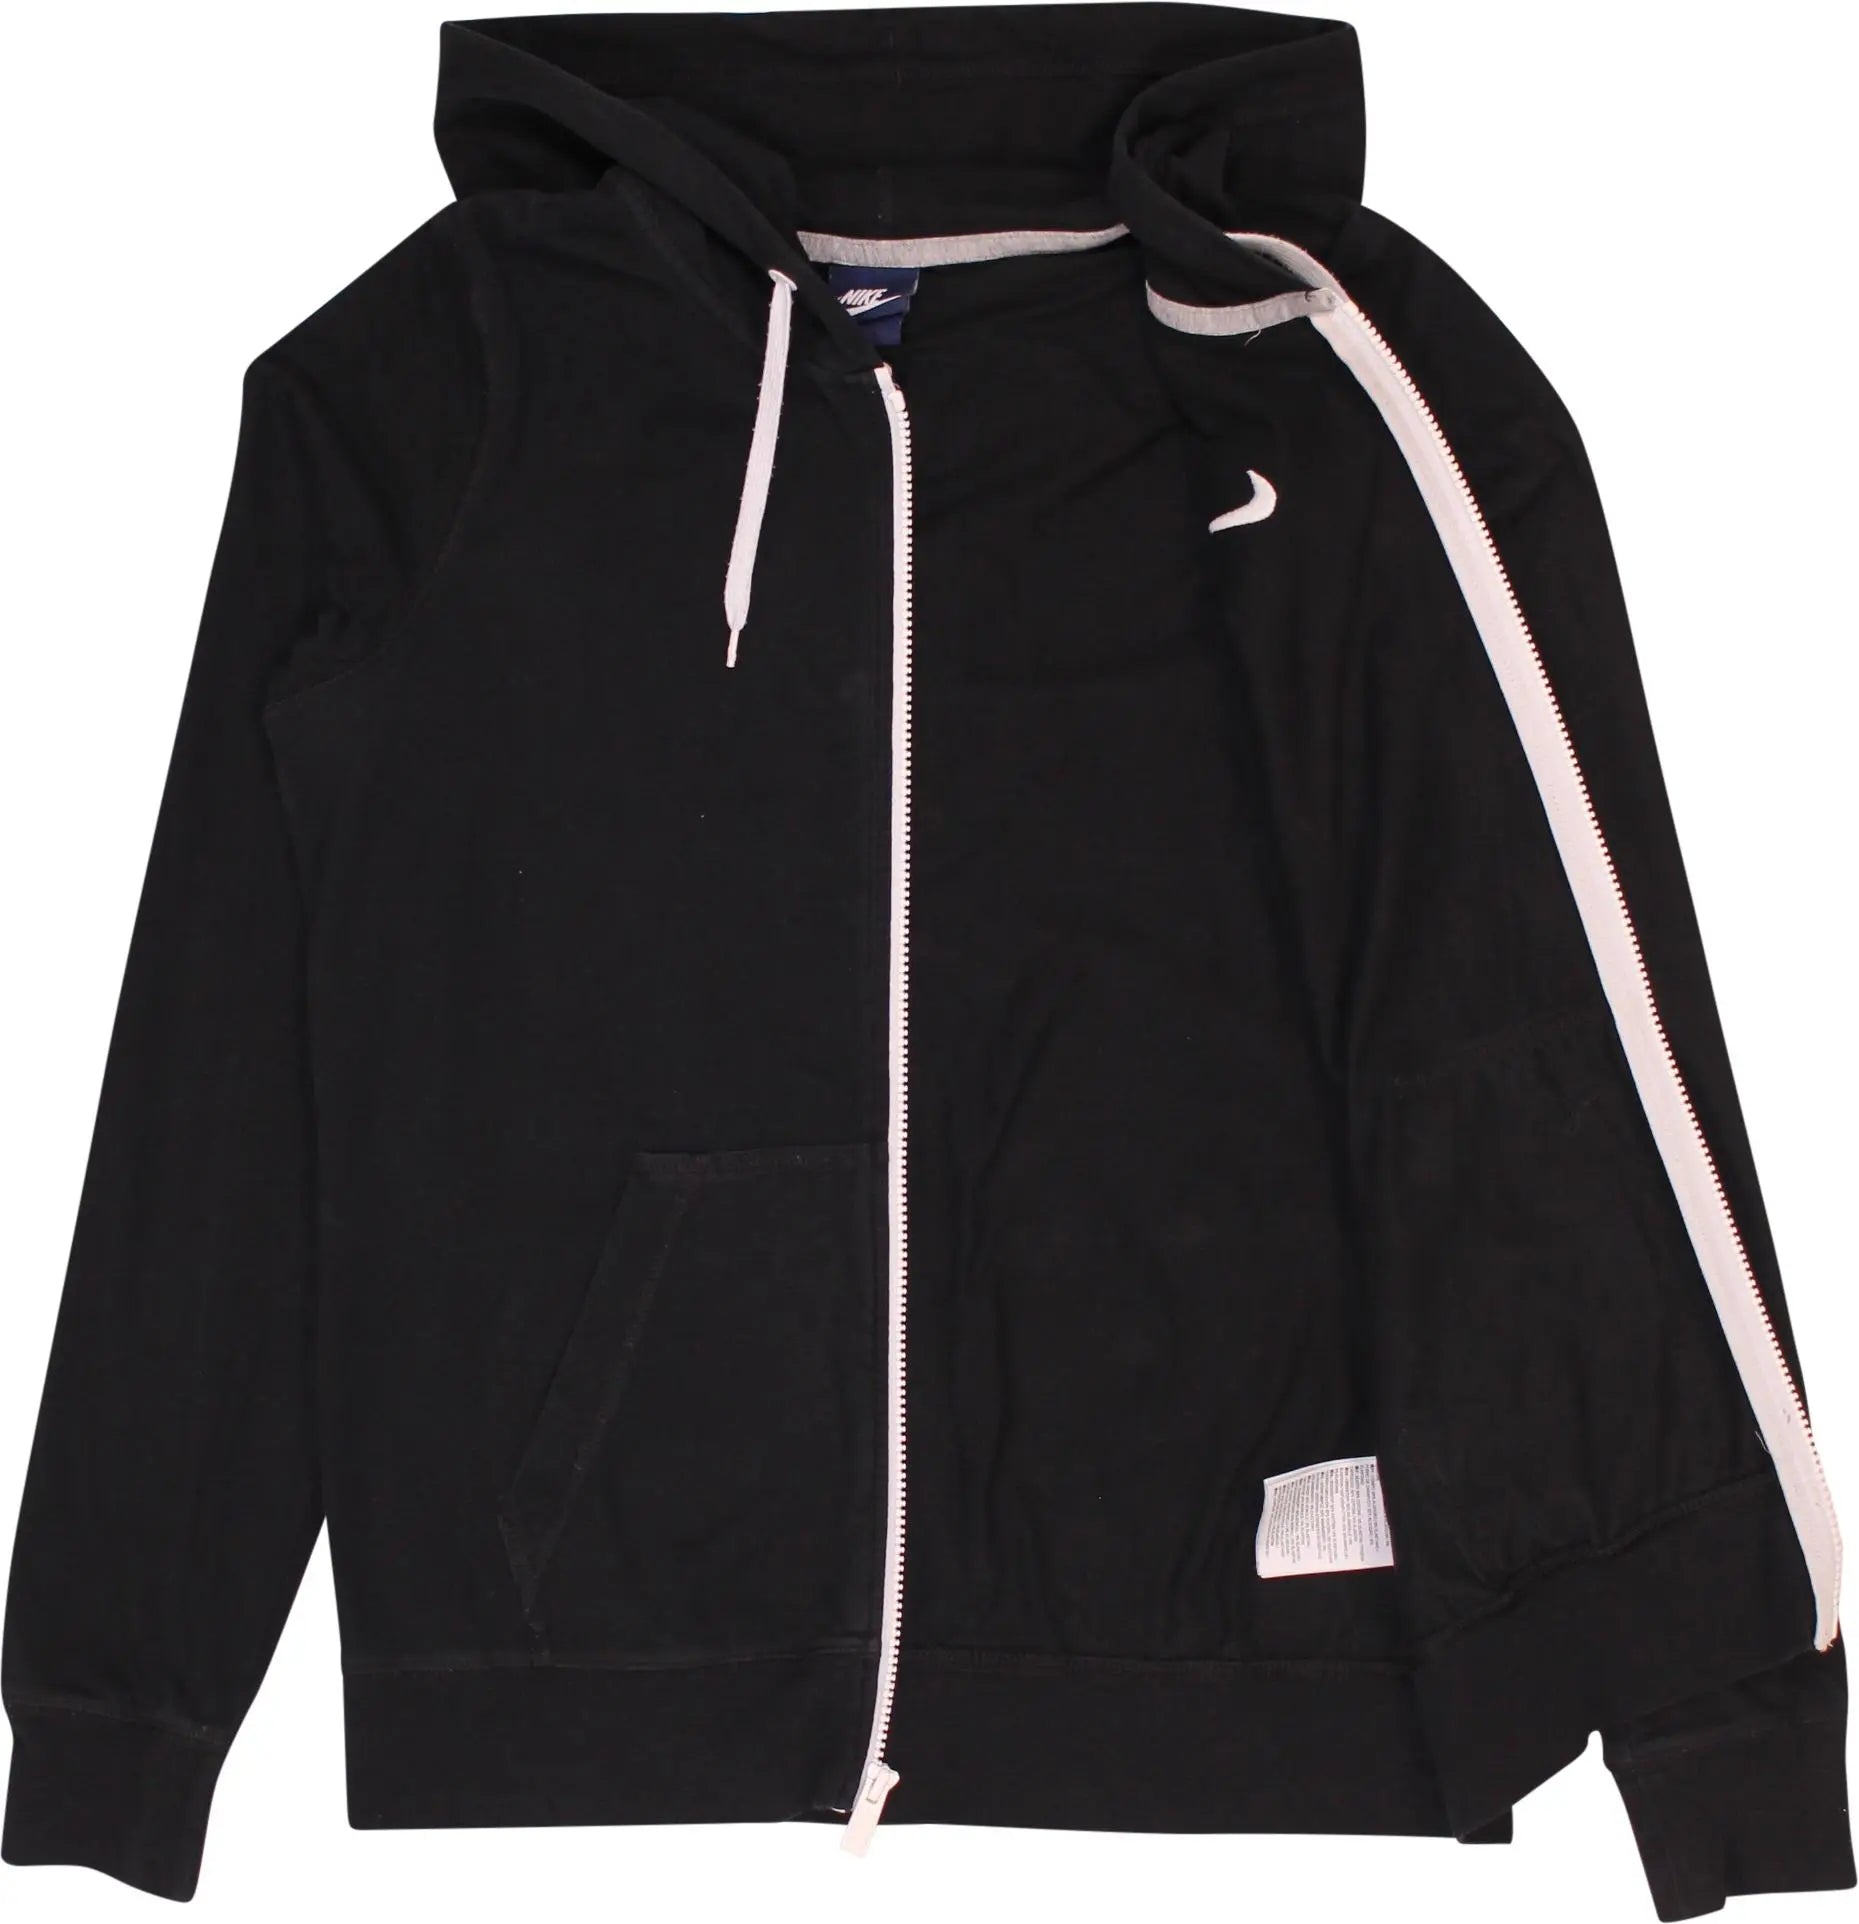 Nike - Nike Full Zip Hoodie- ThriftTale.com - Vintage and second handclothing